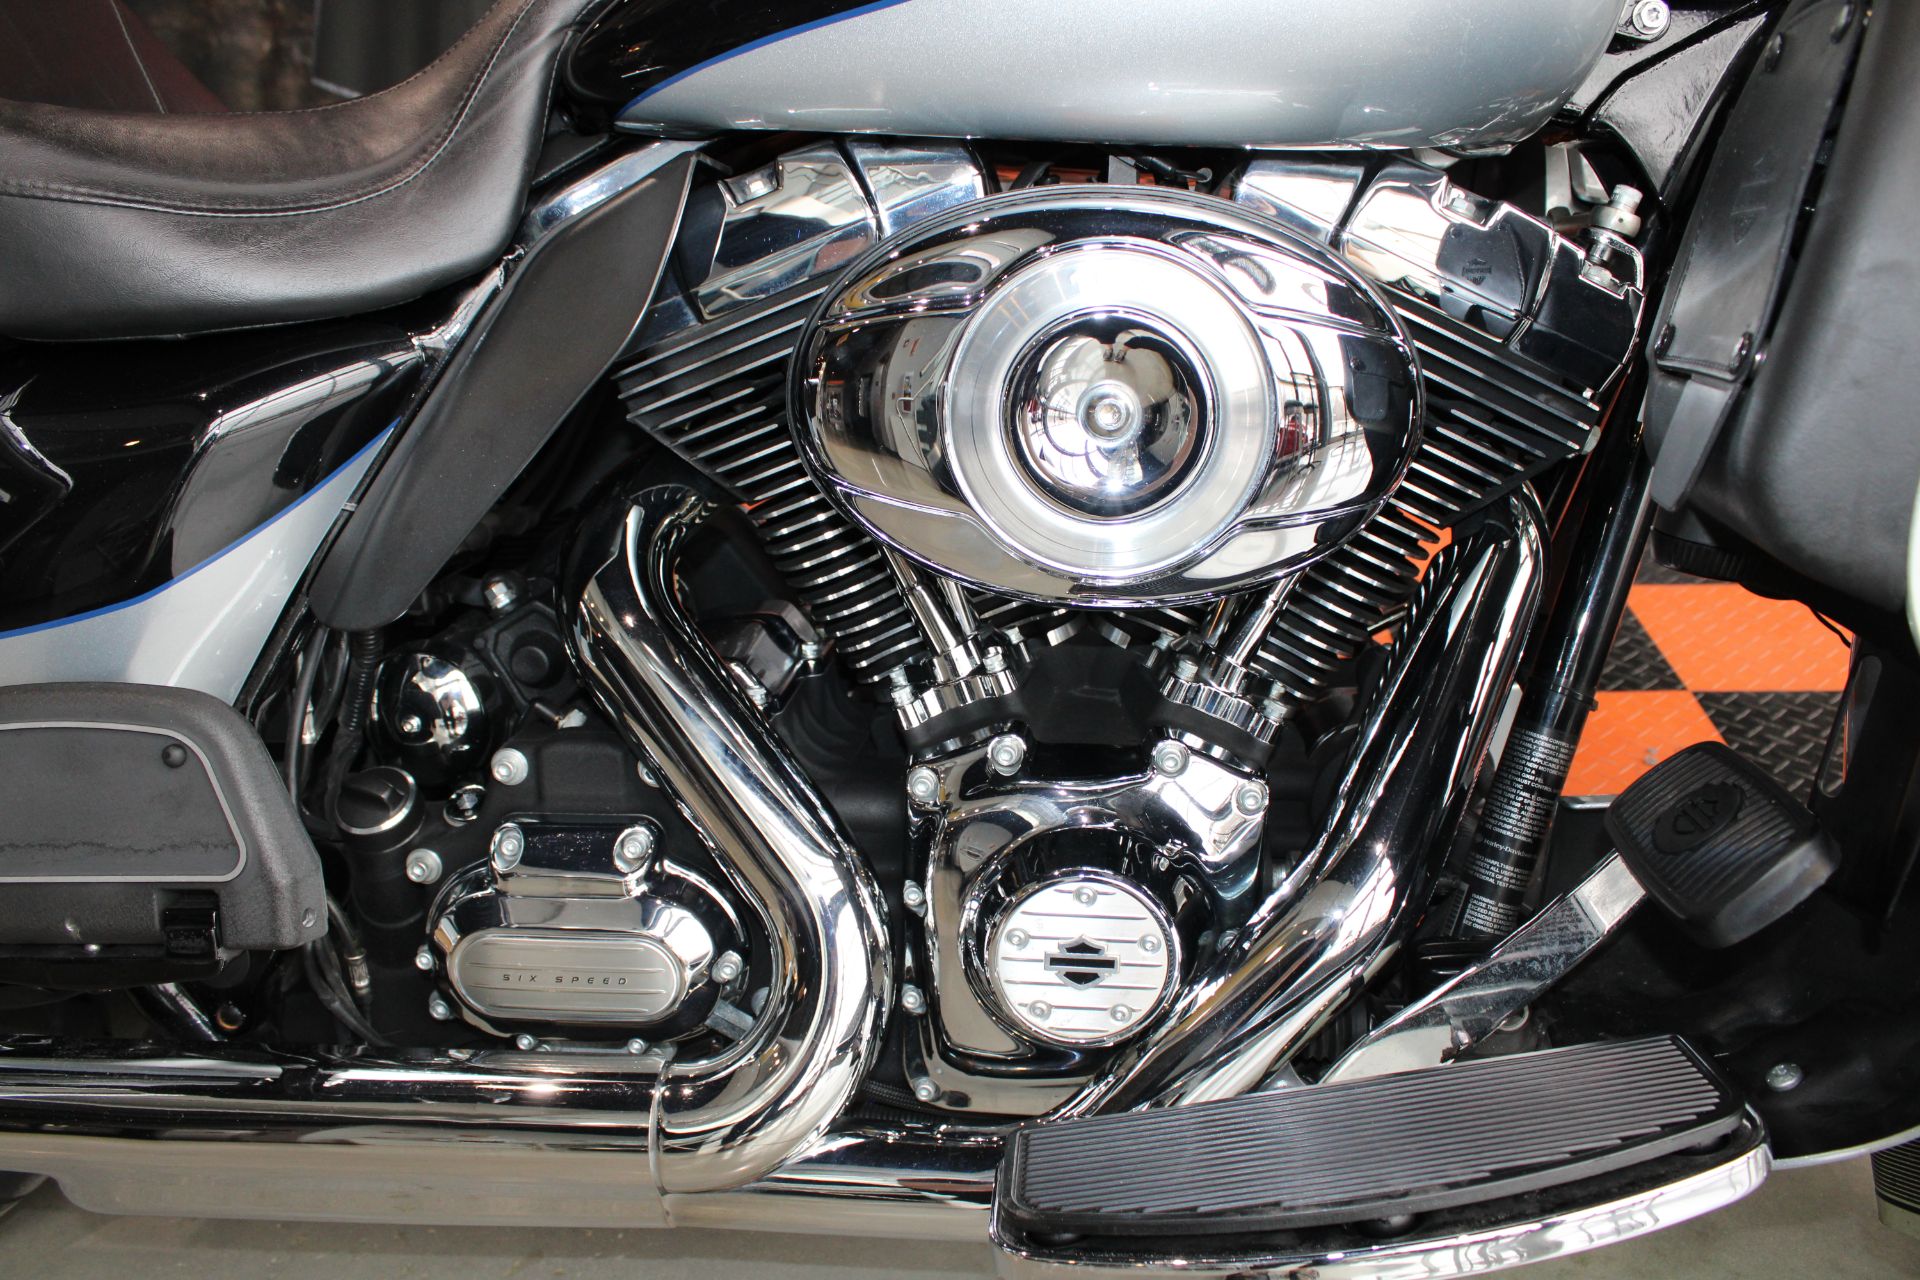 2013 Harley-Davidson Electra Glide® Ultra Limited in Shorewood, Illinois - Photo 5